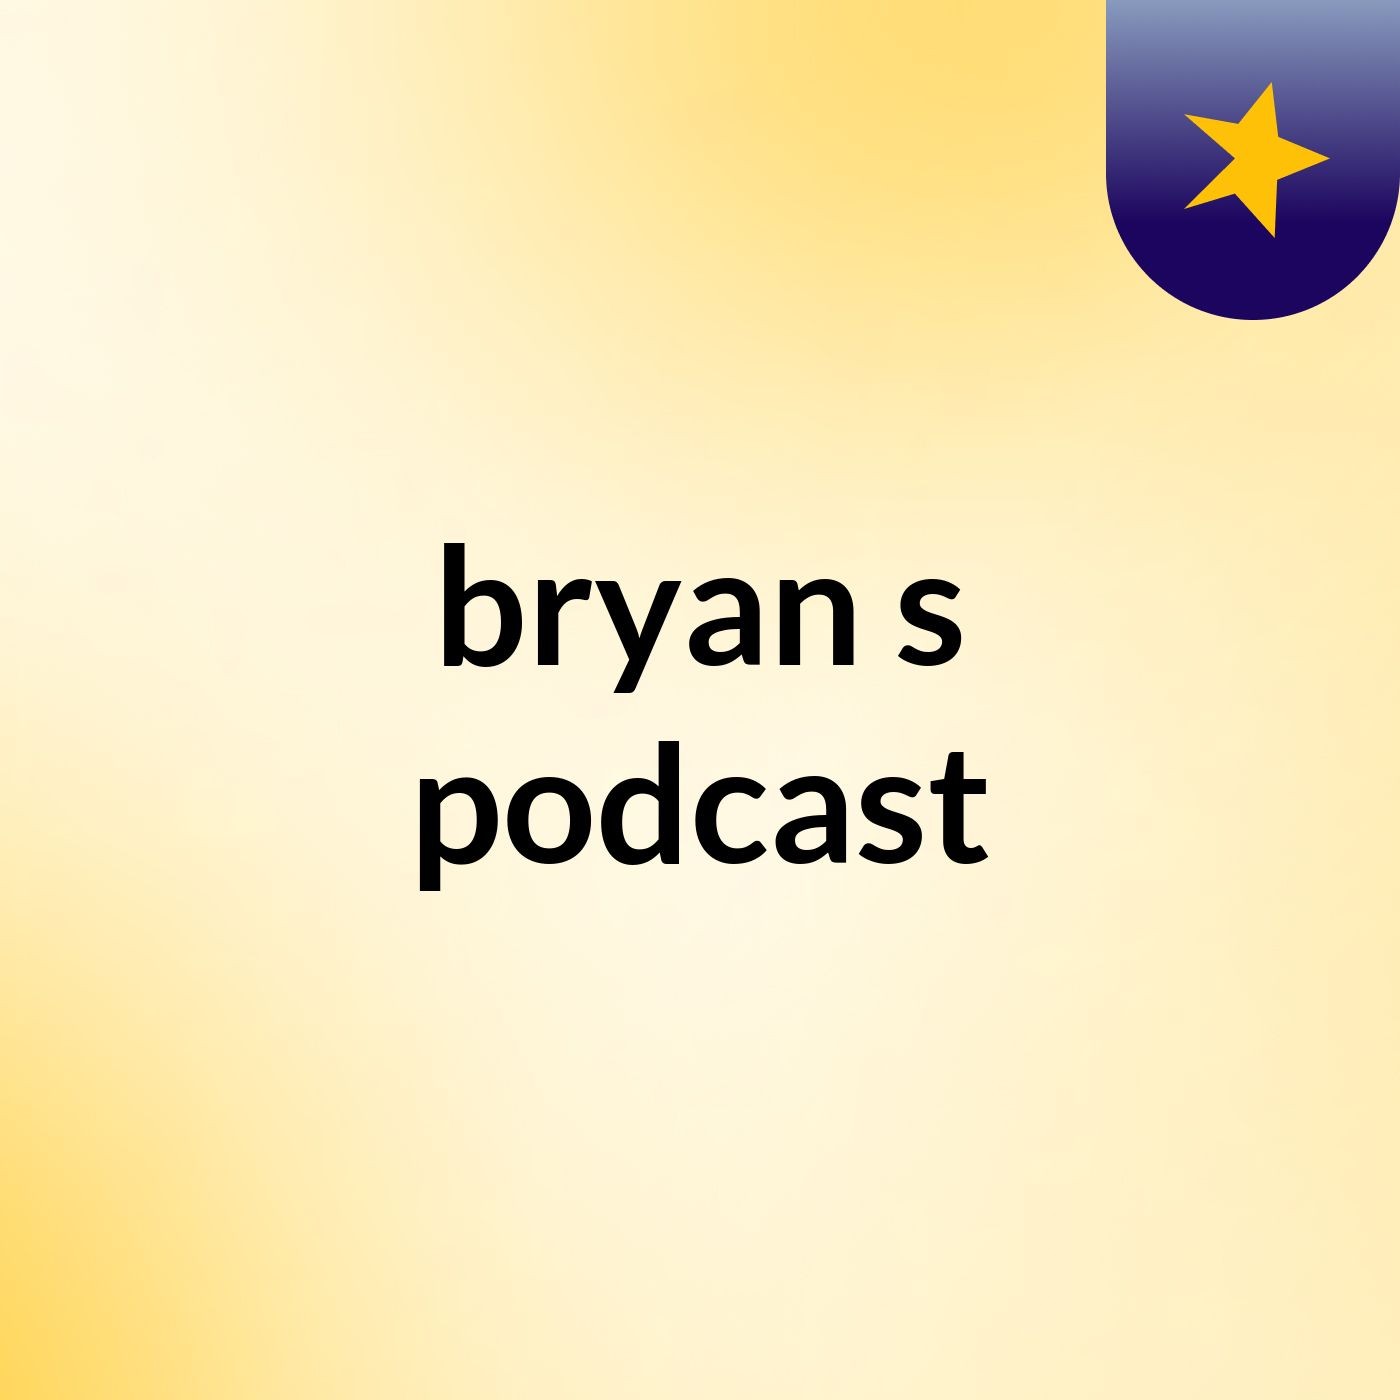 Episode 2 - bryan's podcast